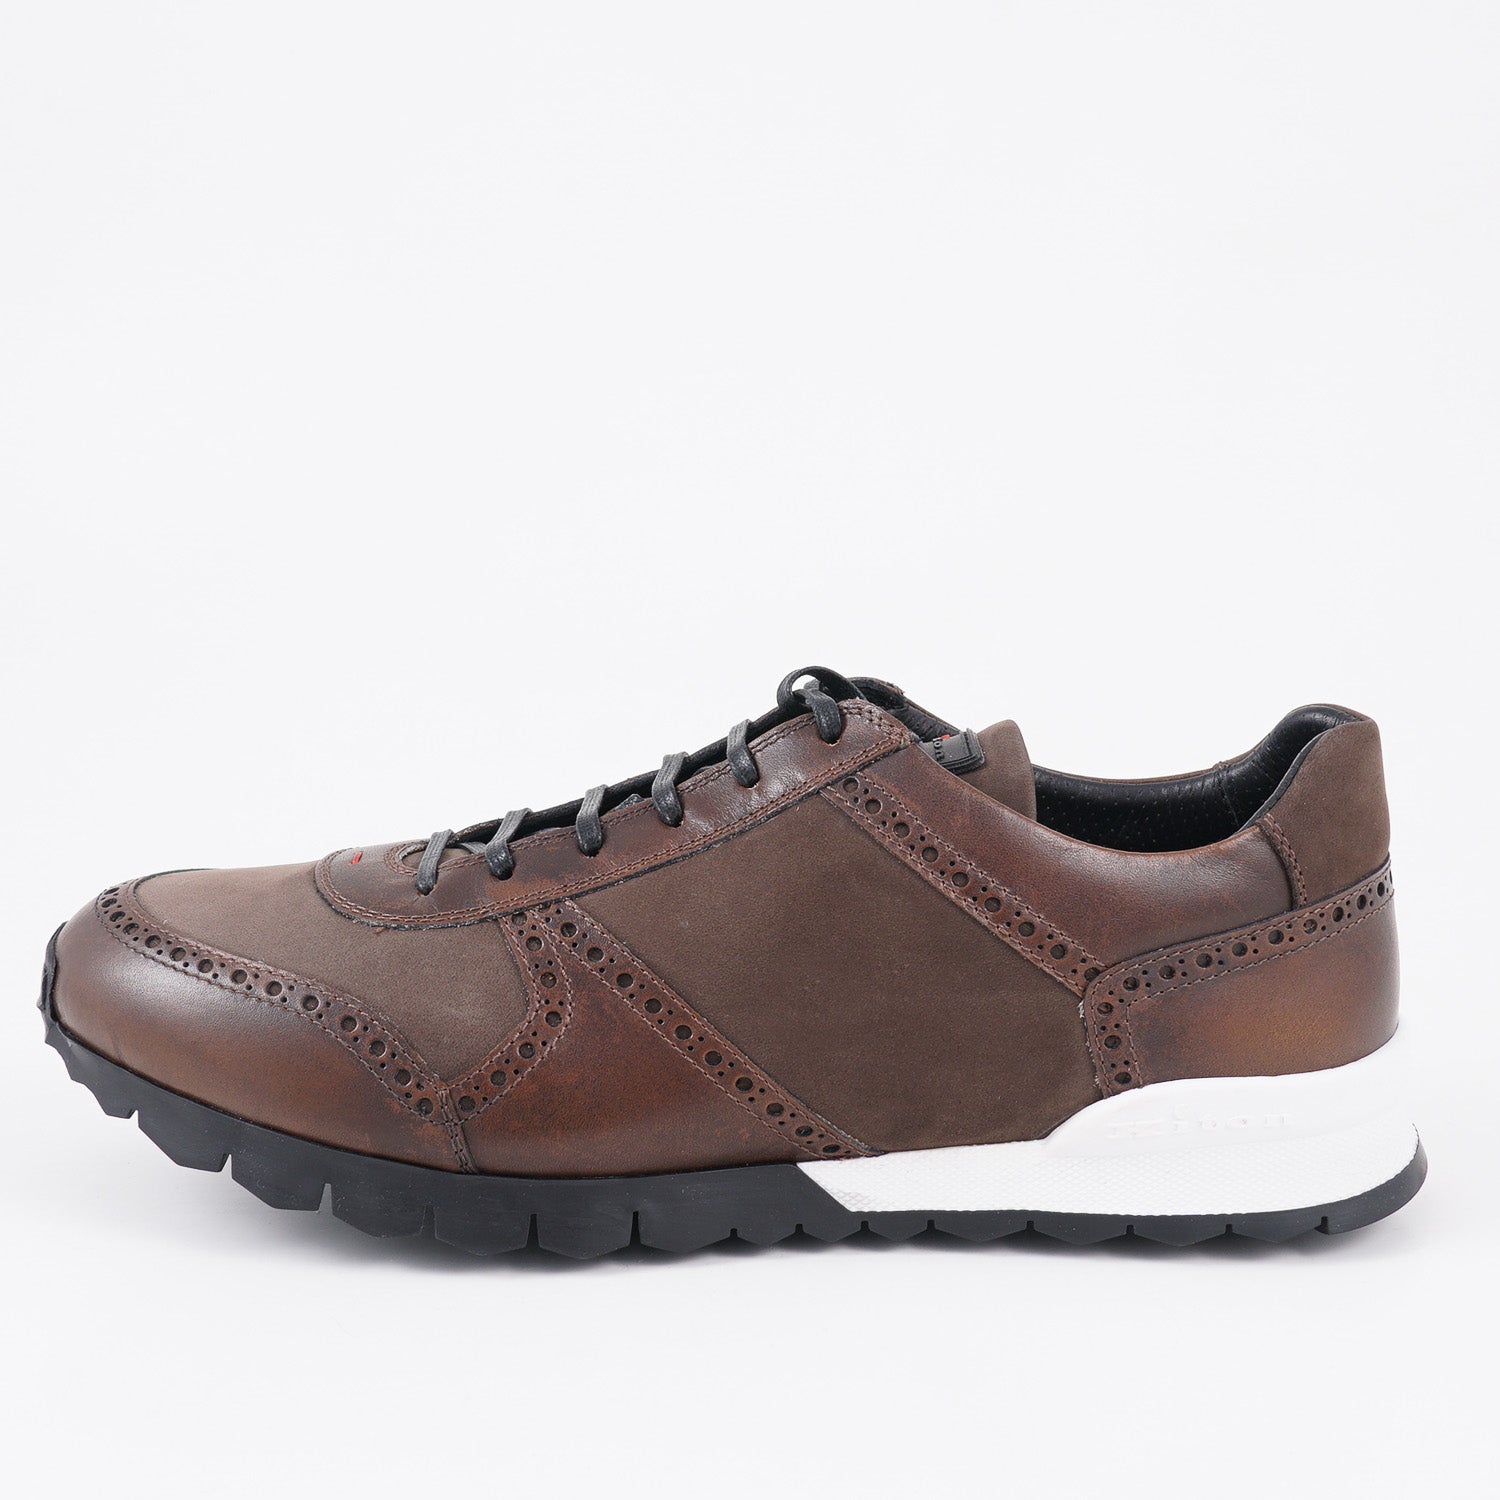 Kiton Calf Leather and Suede Sneakers - Top Shelf Apparel